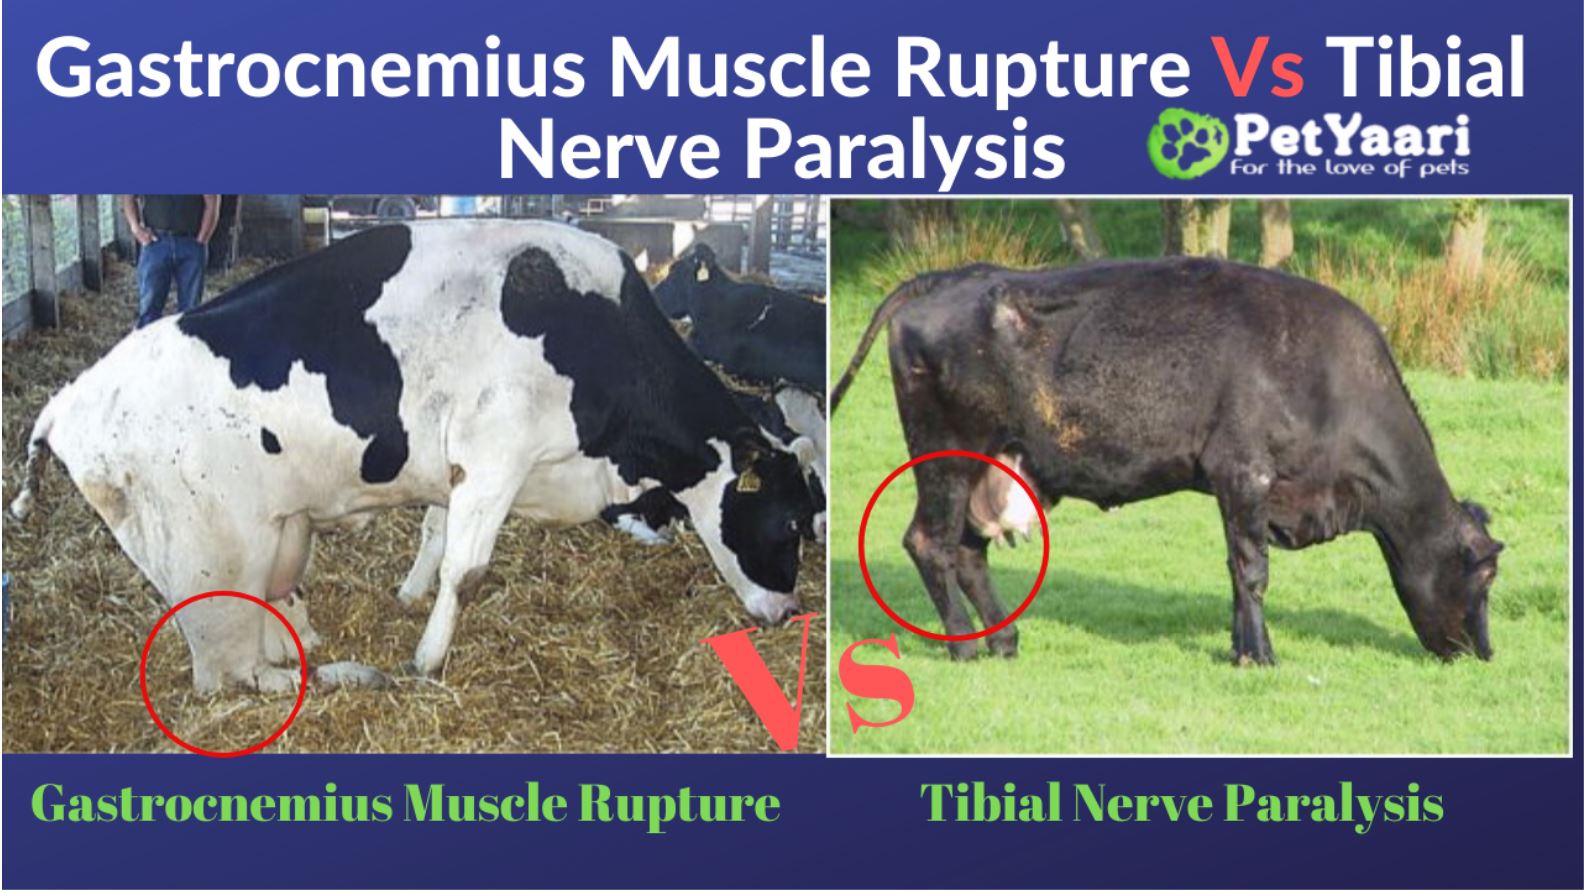 Gastrocnemius Muscle Rupture Vs Tibial Nerve Paralysis